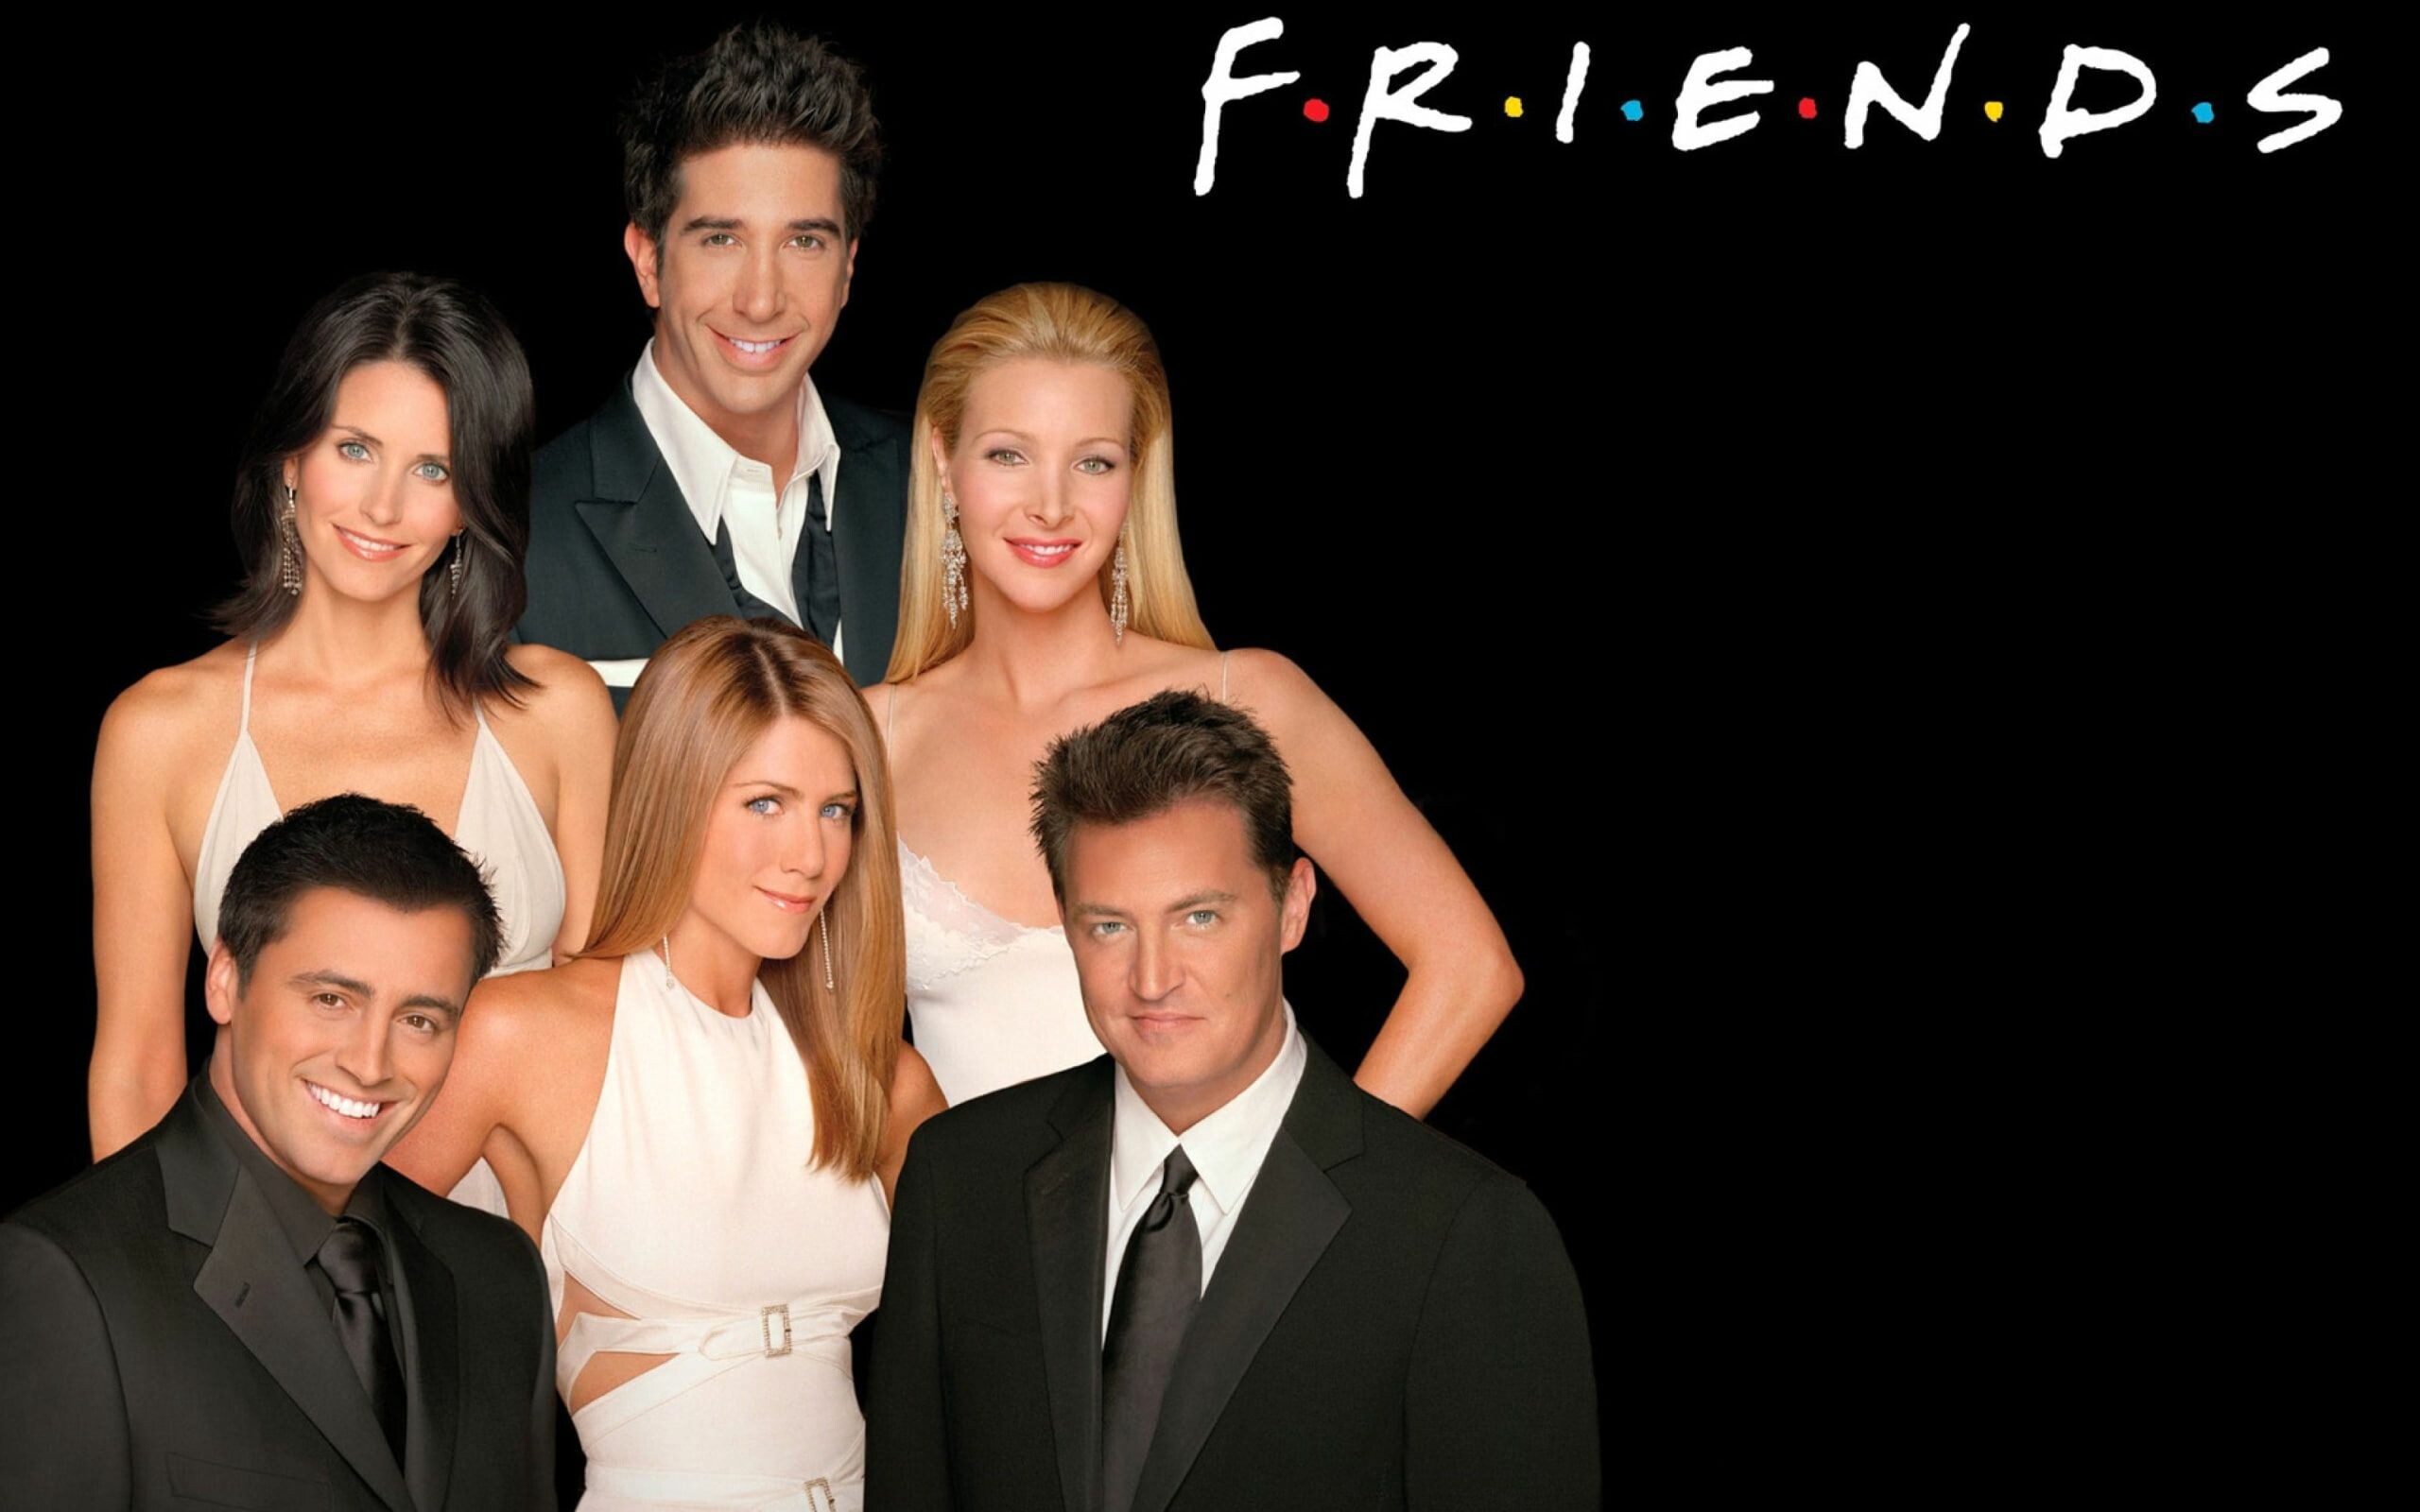 Friends (TV Series): Primetime Emmy Award for Outstanding Comedy Series in 2002. 2560x1600 HD Background.